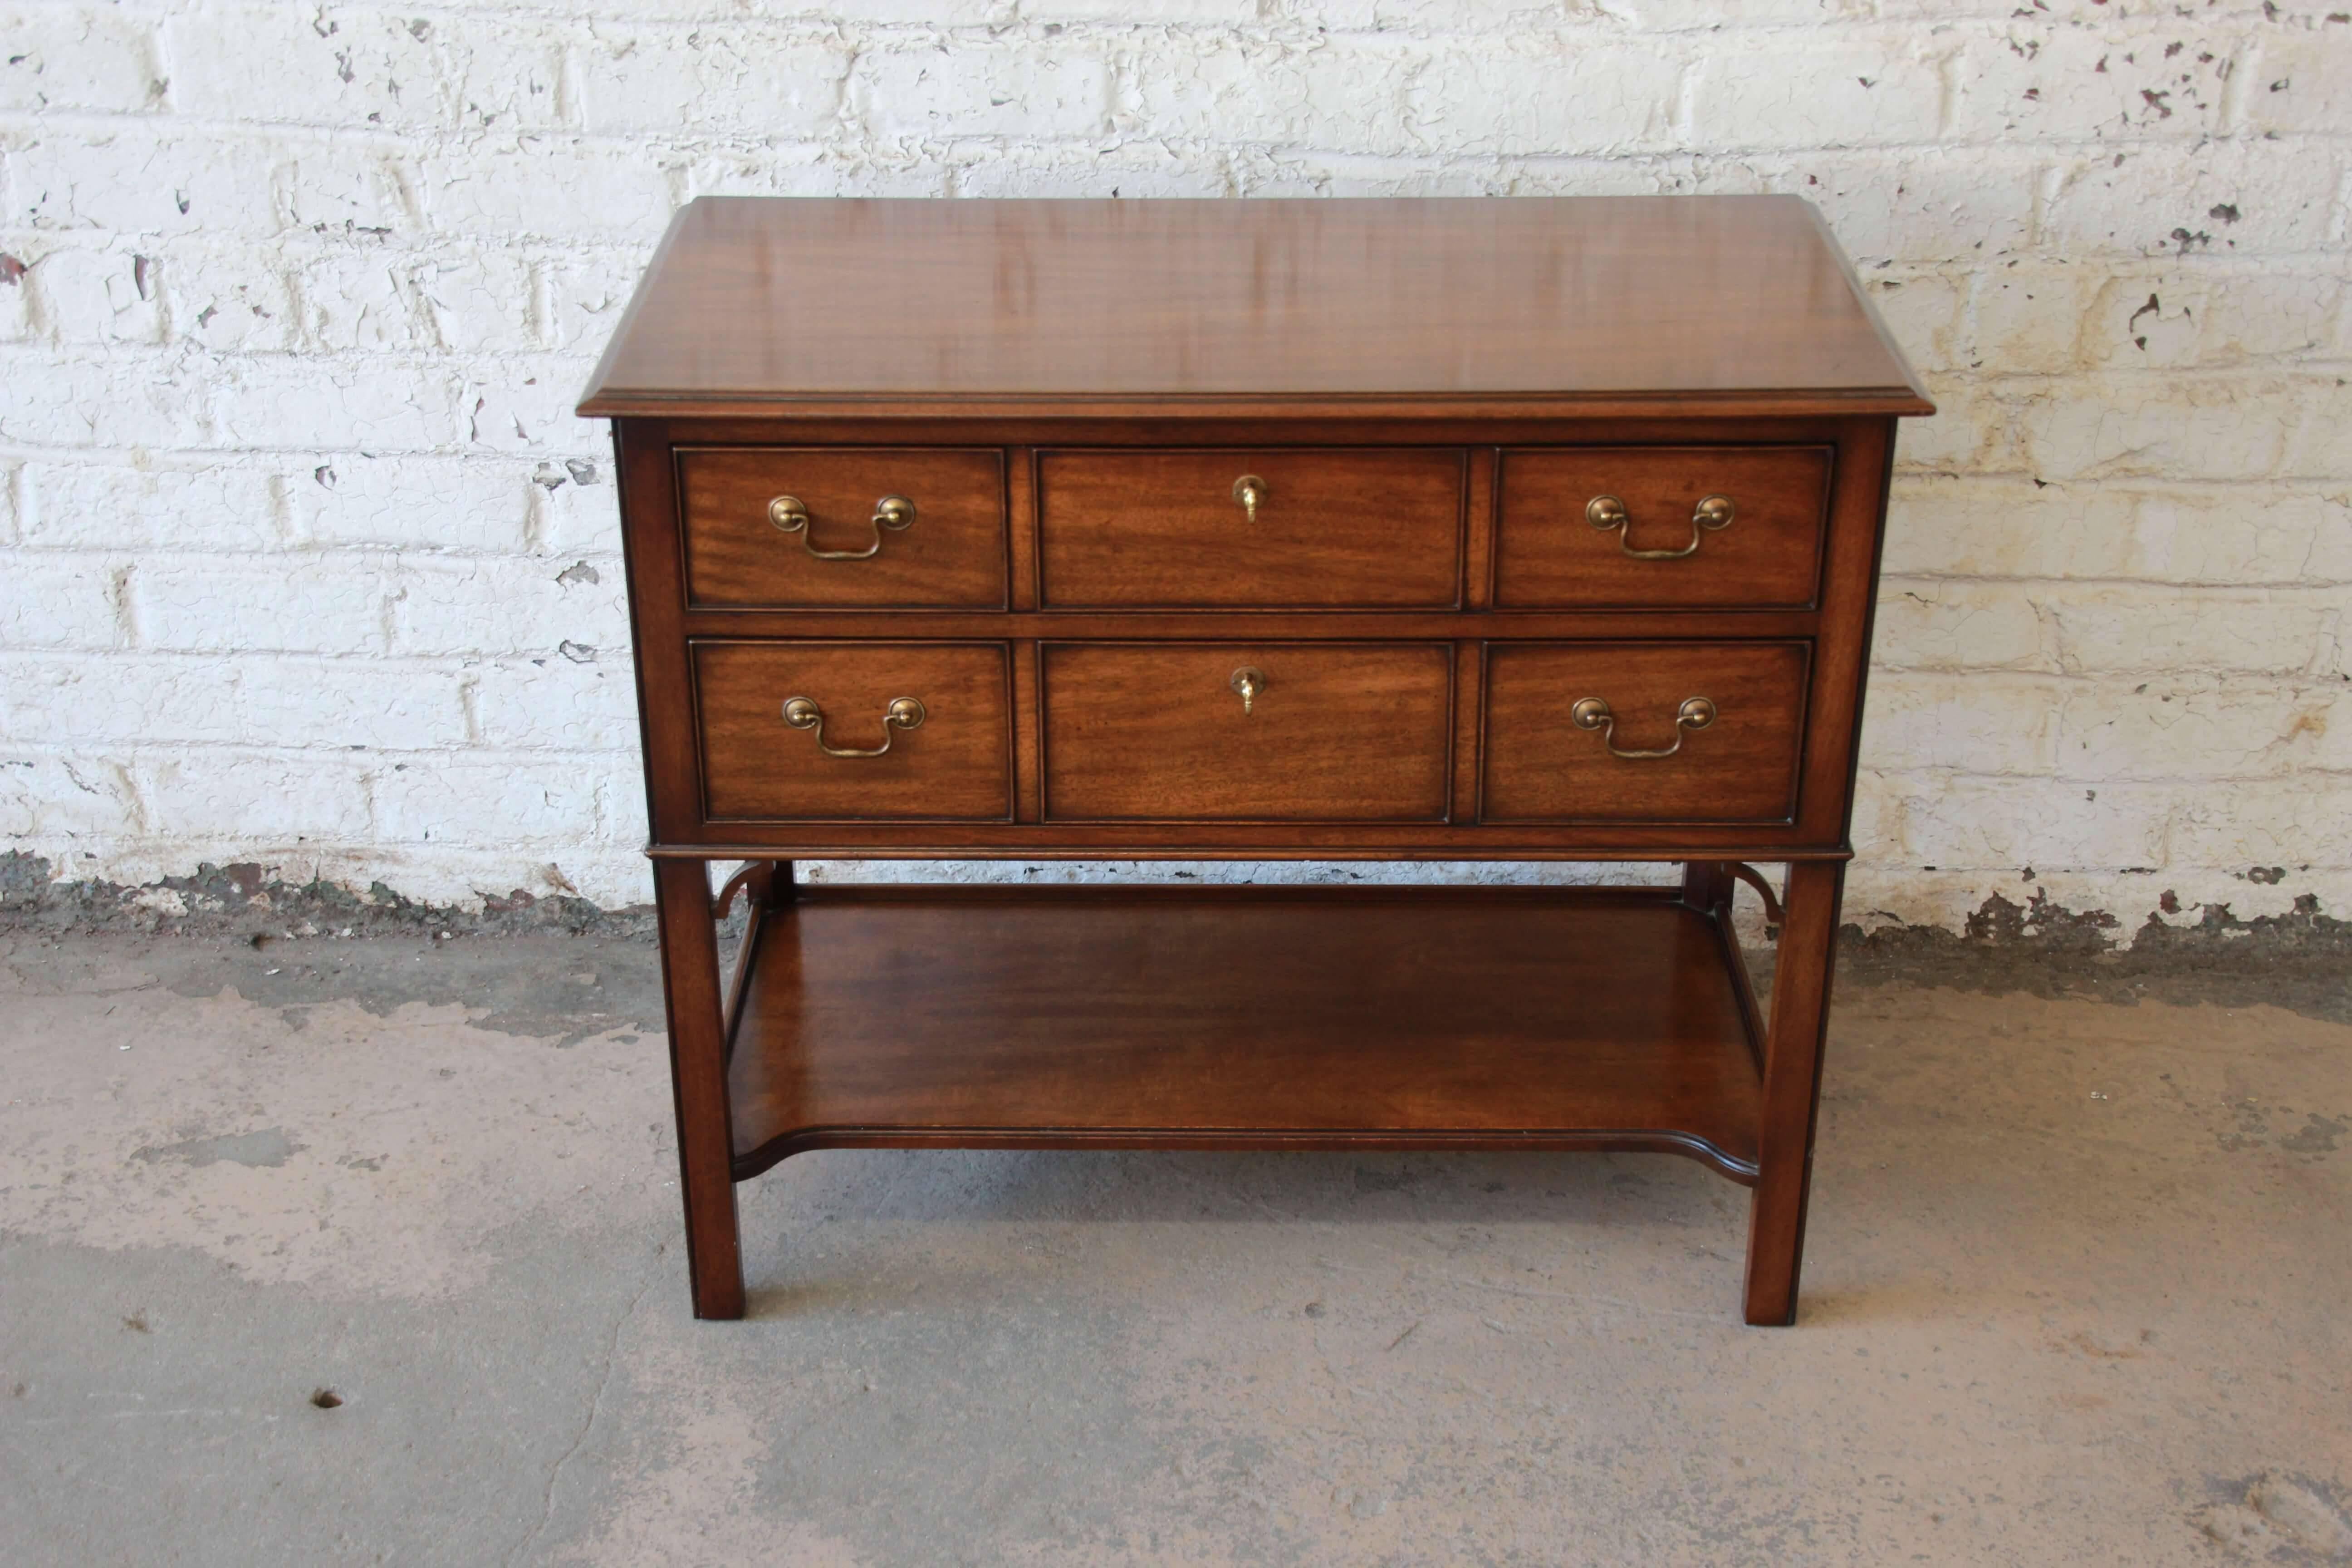 Offering a very nice Kindel Furniture sideboard server. The server has a moderate Asian style to it would brass details and two drawers for ample storage. The bottom of the server also has a shelf for storage and display. The server comes with two